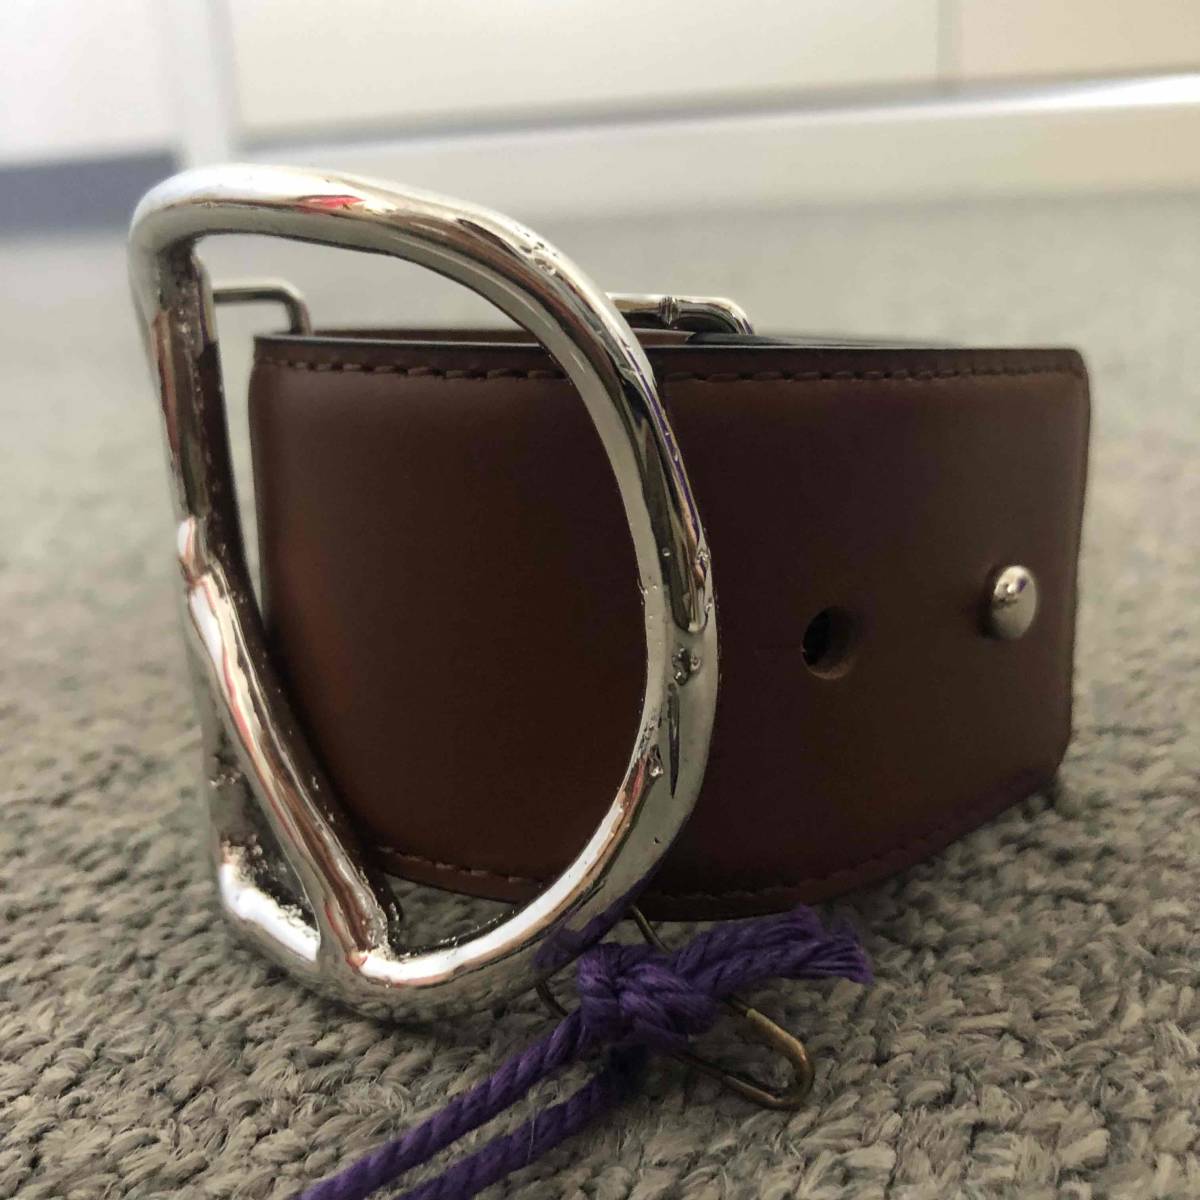  new goods unused size S Needles Peace Buckle Bracelet Steer Leather Brown needle z piece buckle bracele stereo a leather 